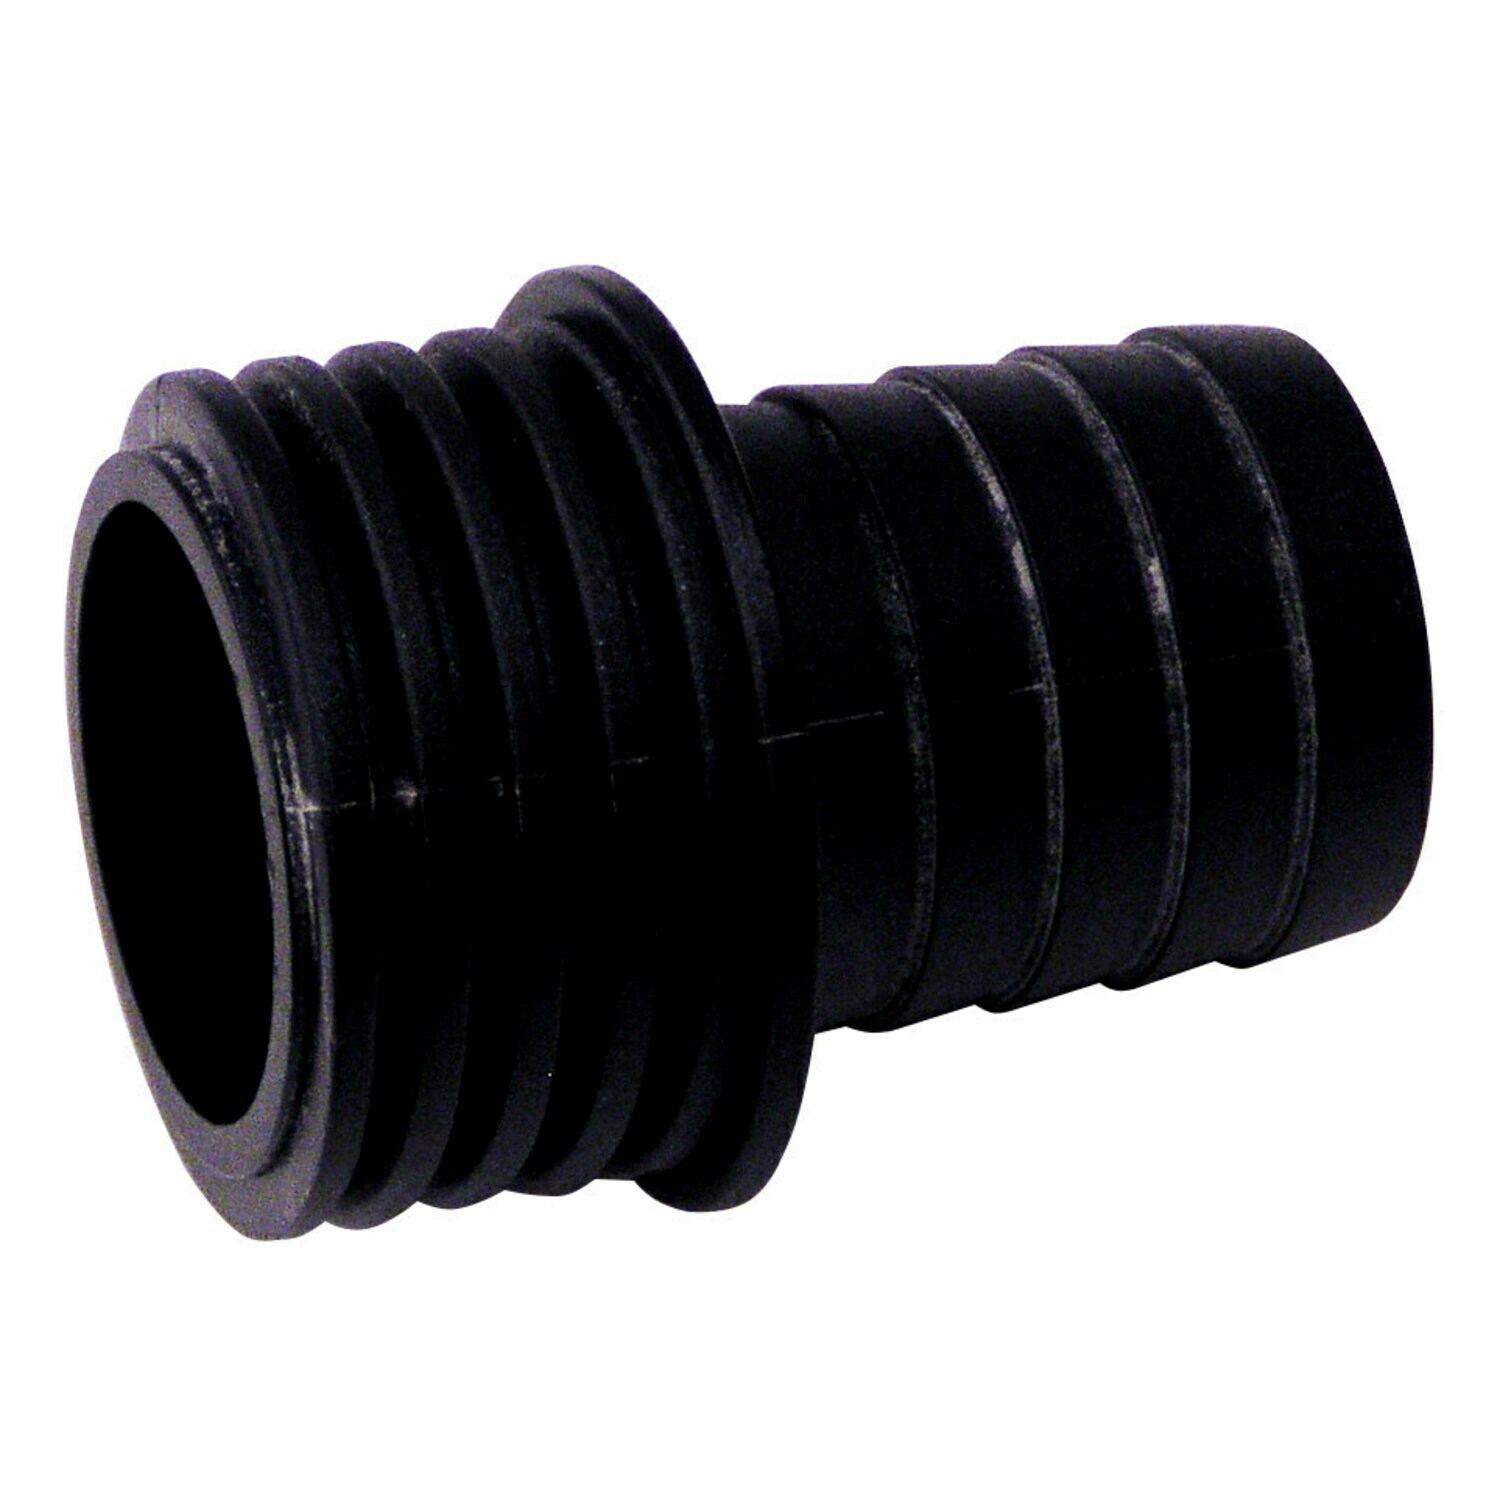 7000045250 - 3M Vacuum Hose Fitting Adapter 28304, 1 in External Hose Thread x 1 in
Friction Fitting Barb